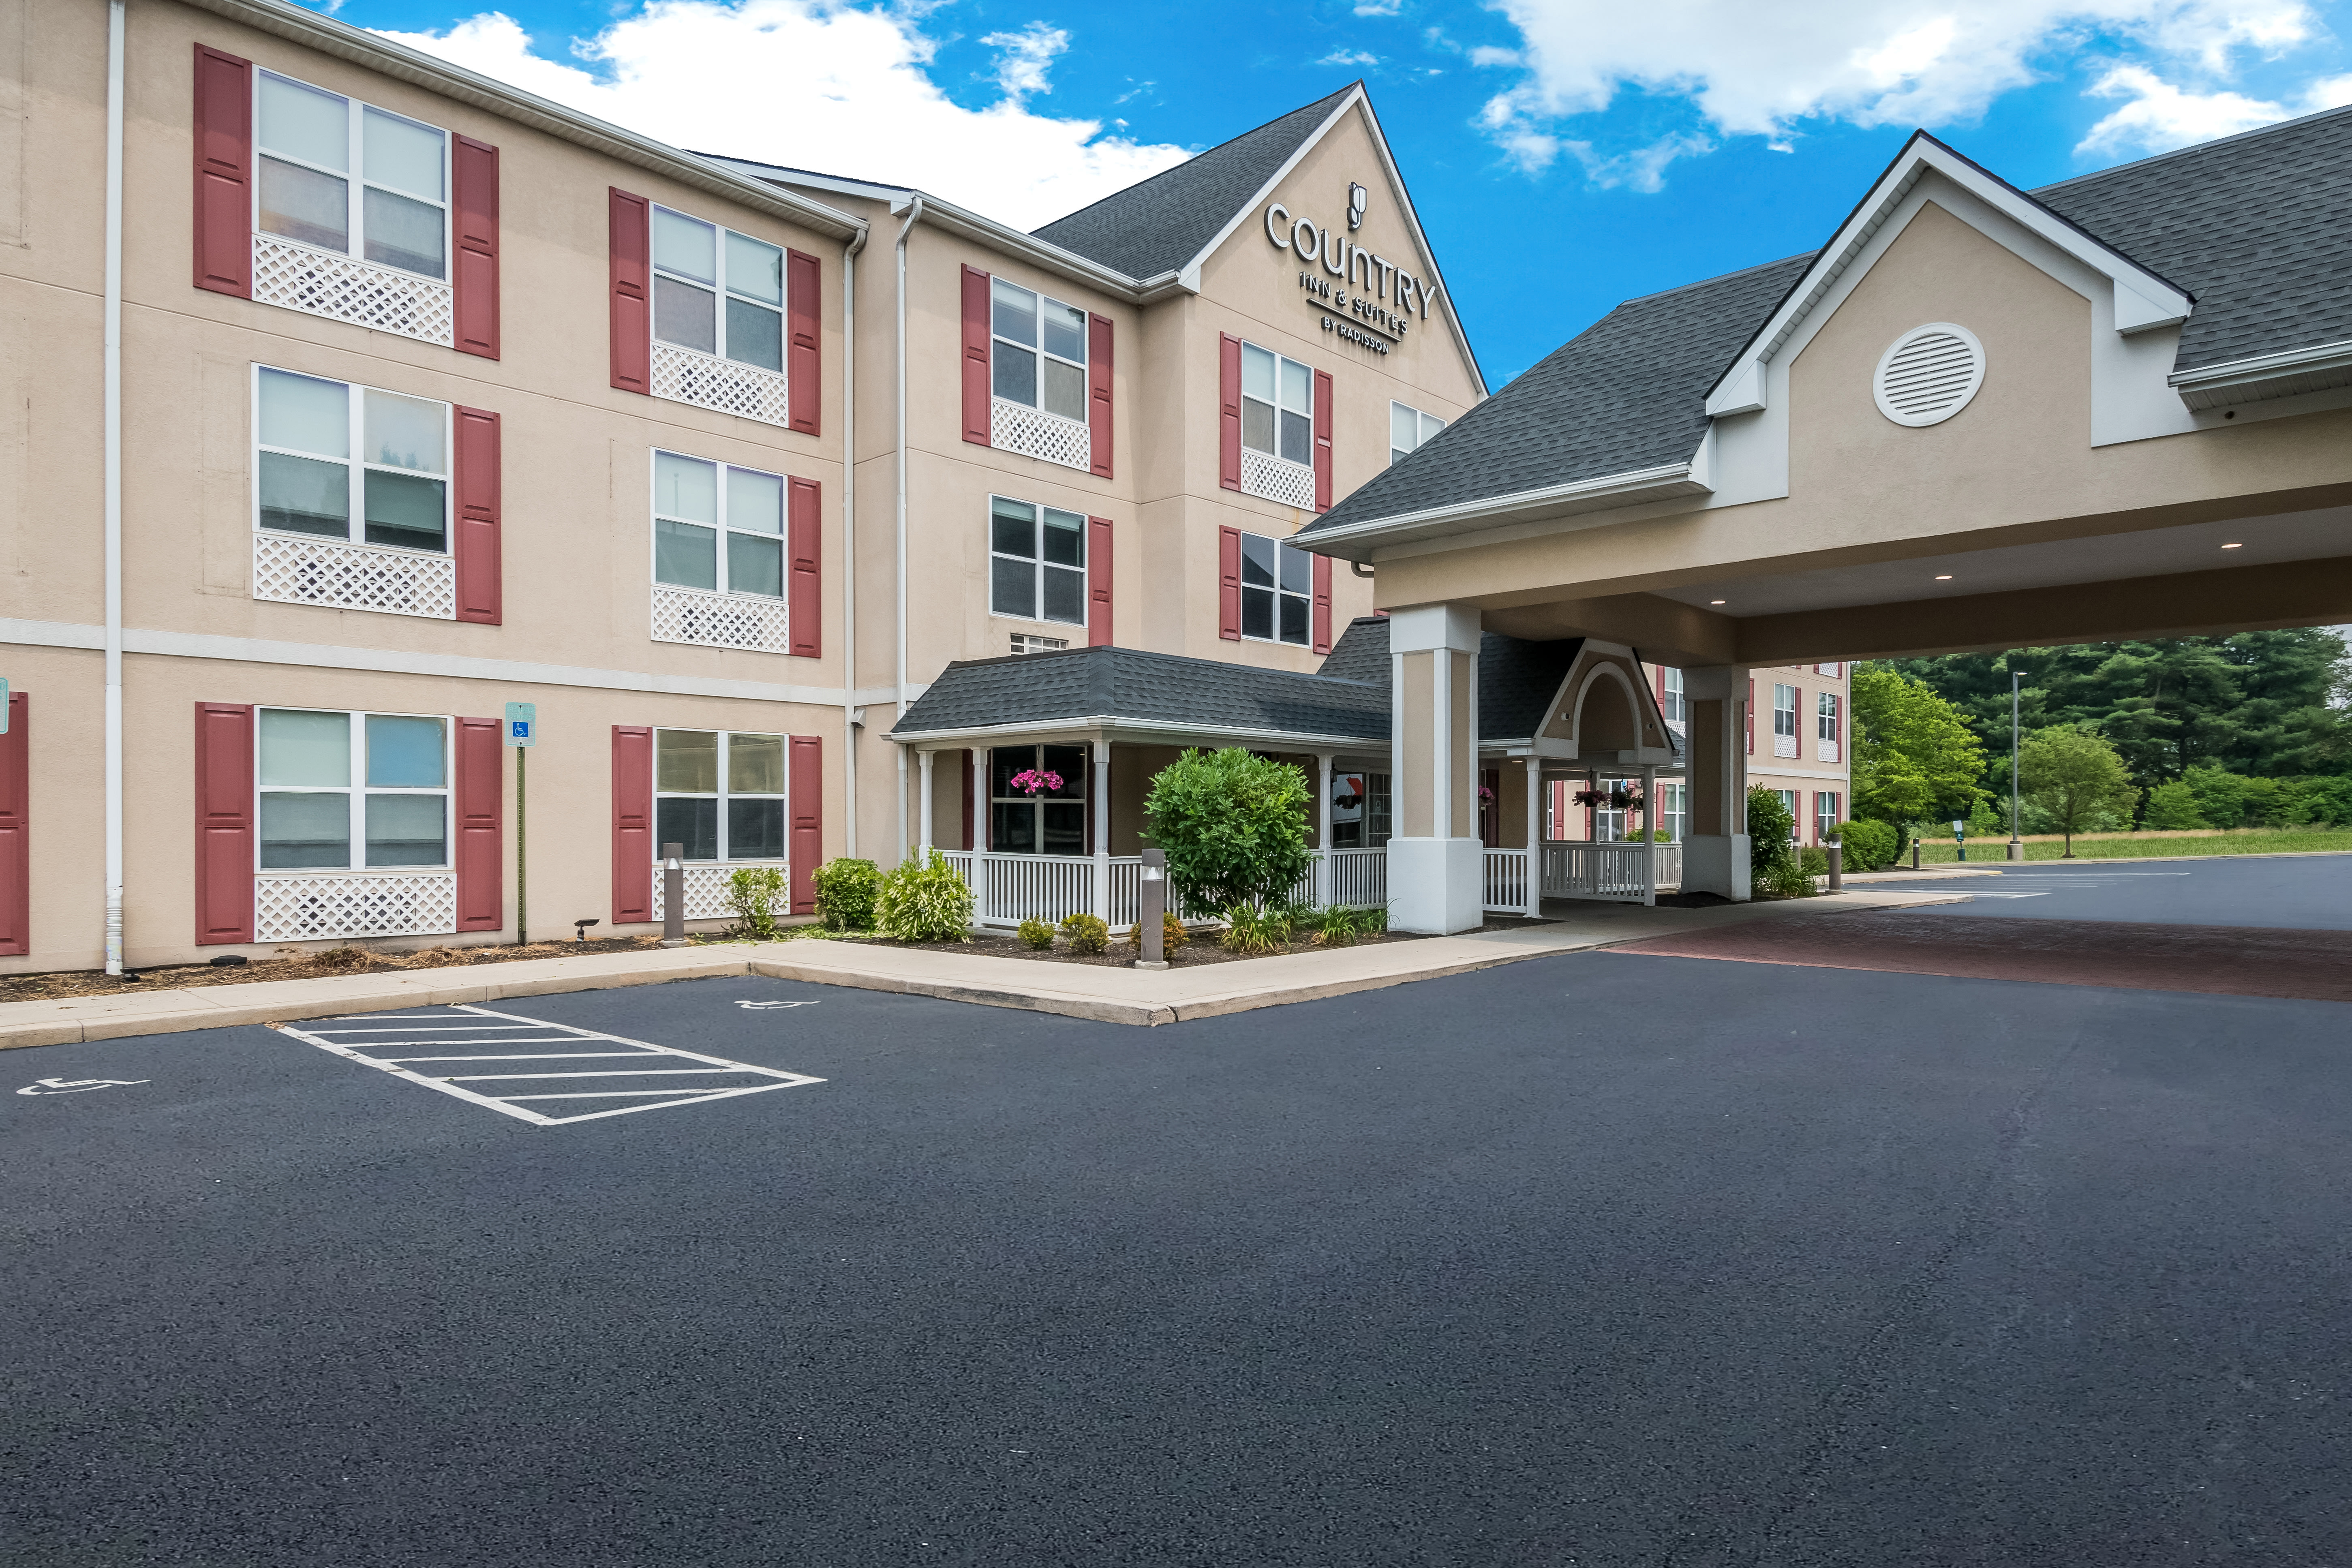 Country Inn & Suites | Schofield, WI